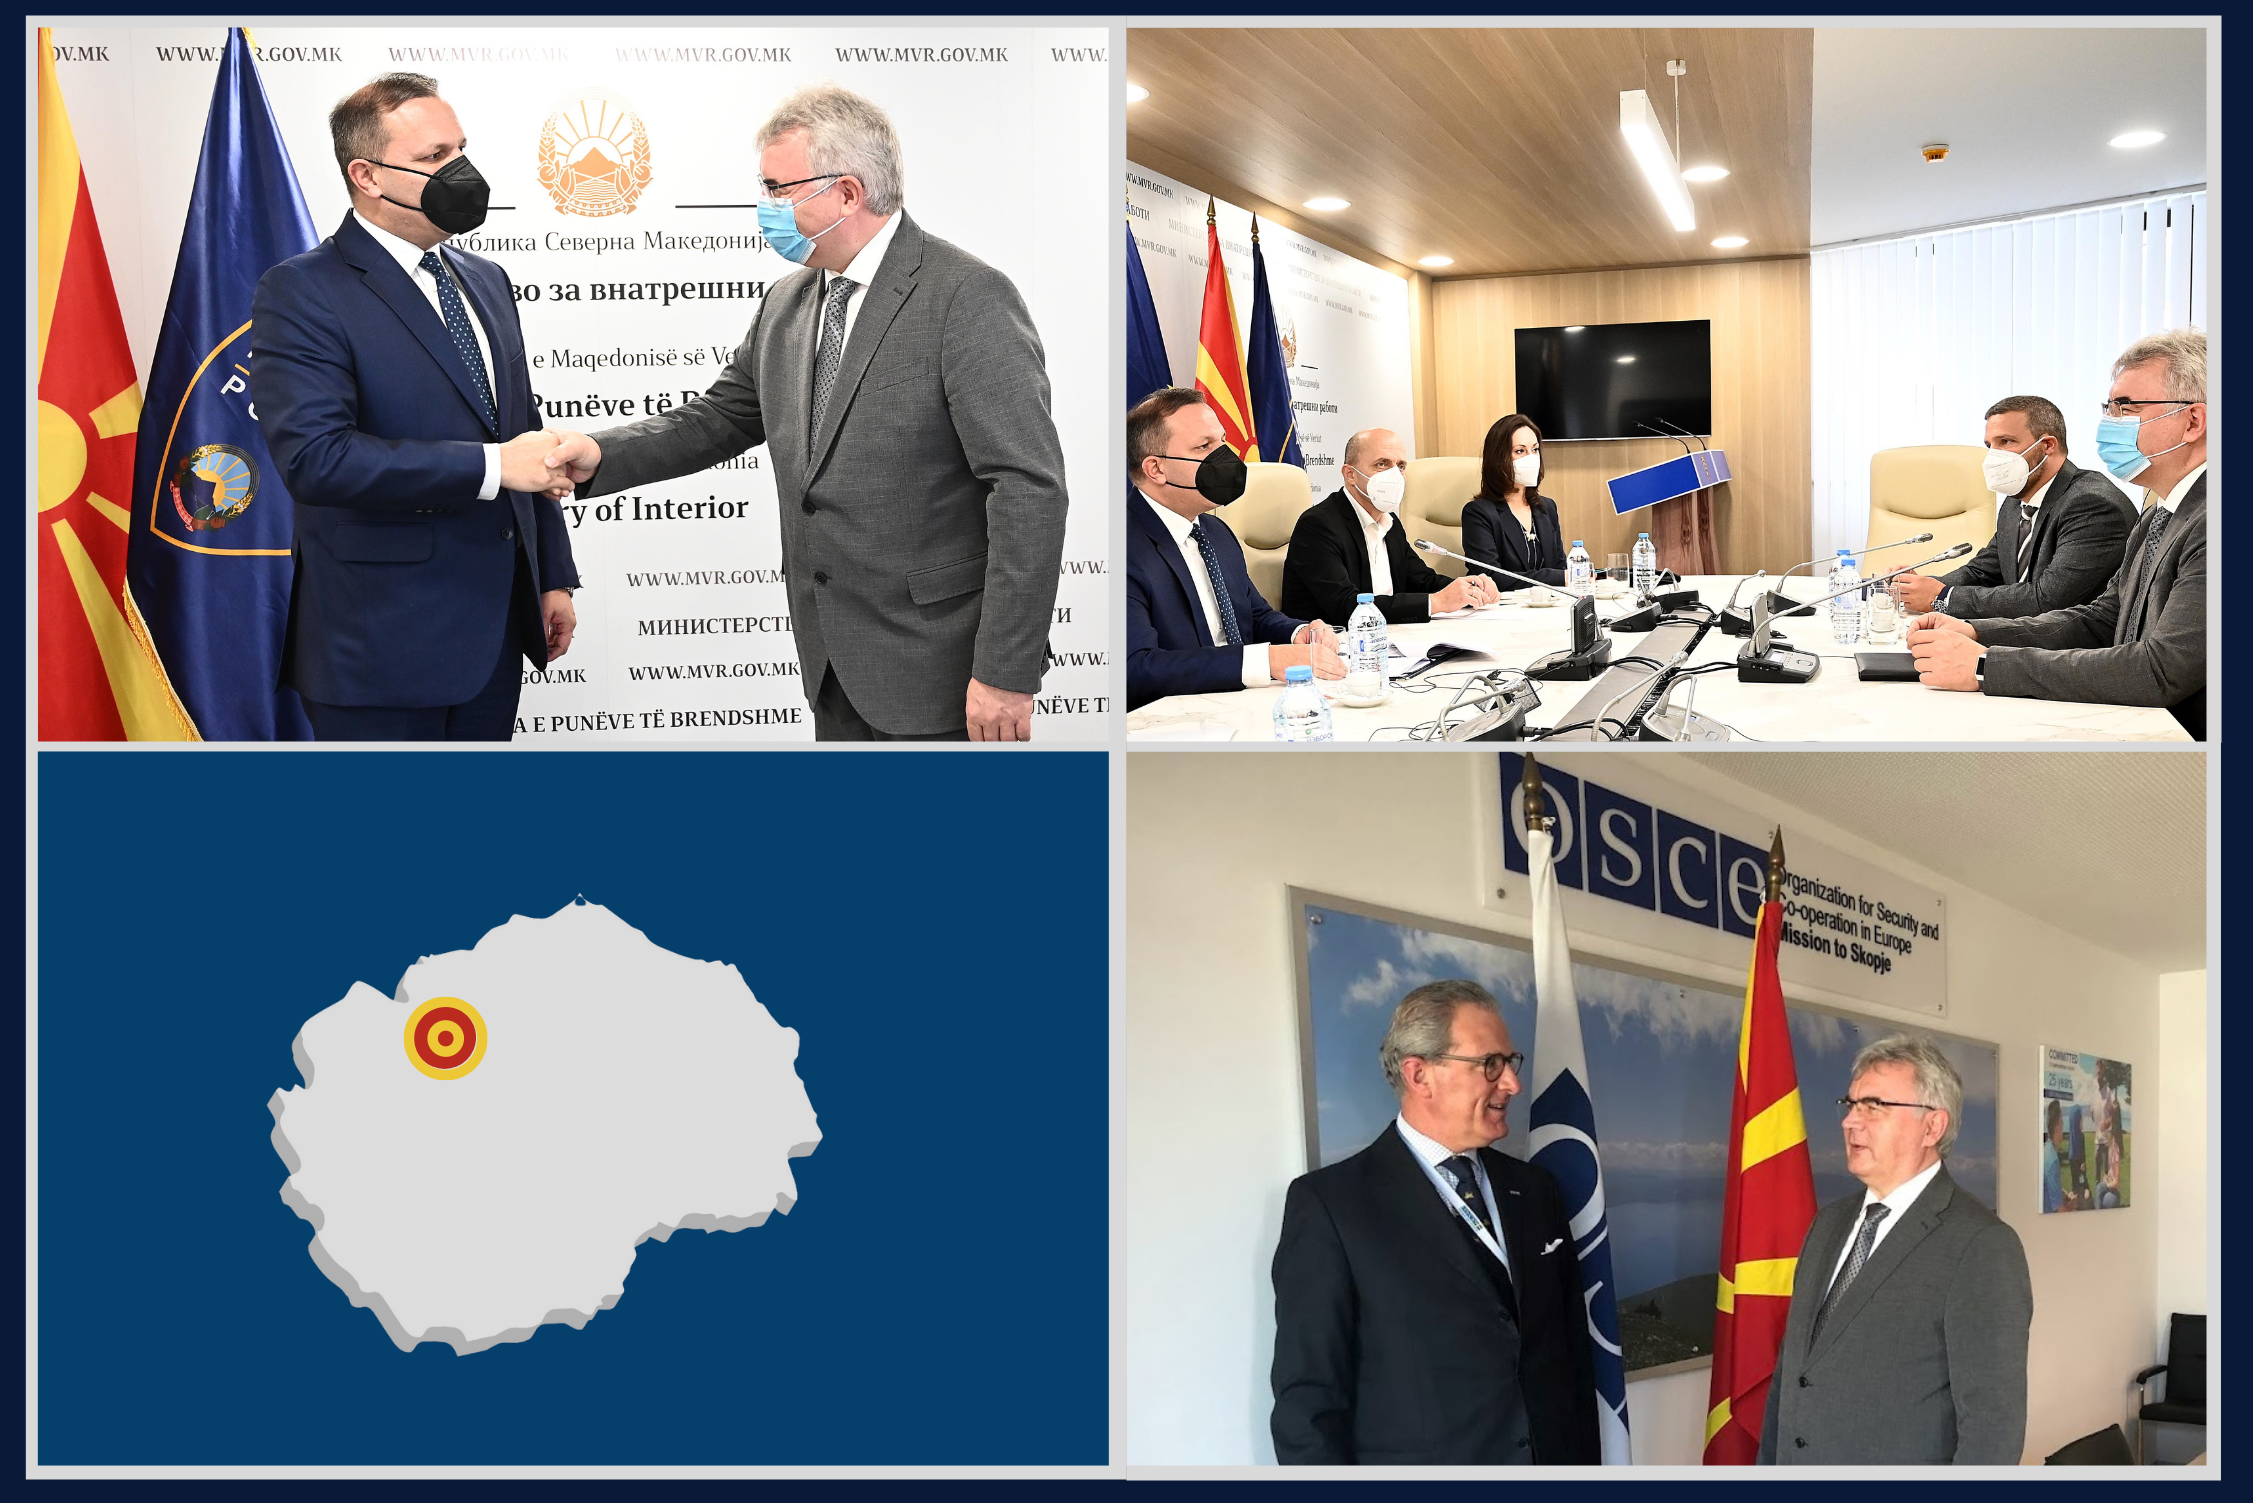 CEPOL Executive Director meets Minister of Internal Affairs in North Macedonia